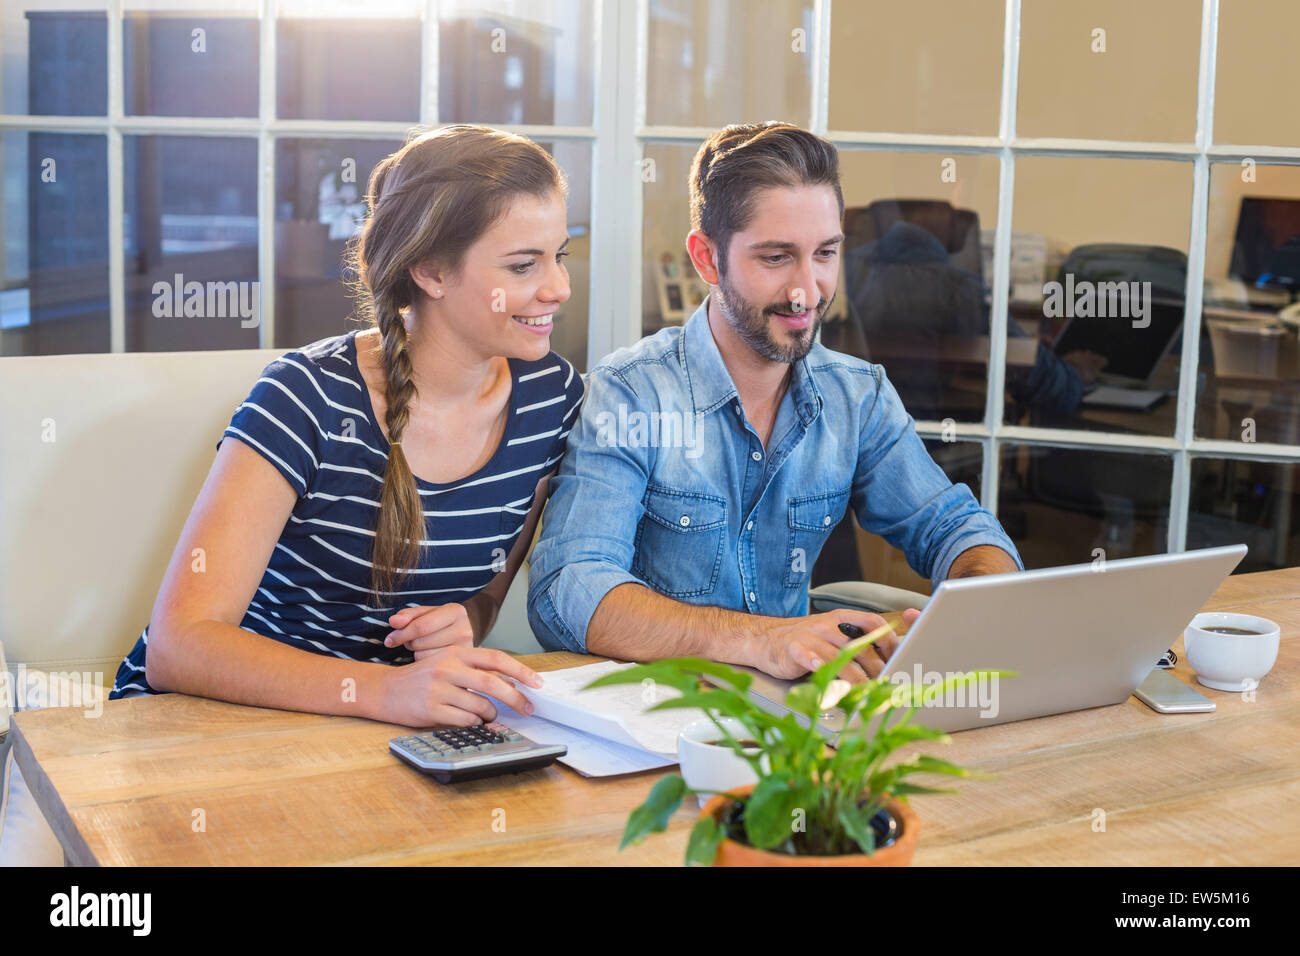 Partners working at desk using laptop Stock Photo